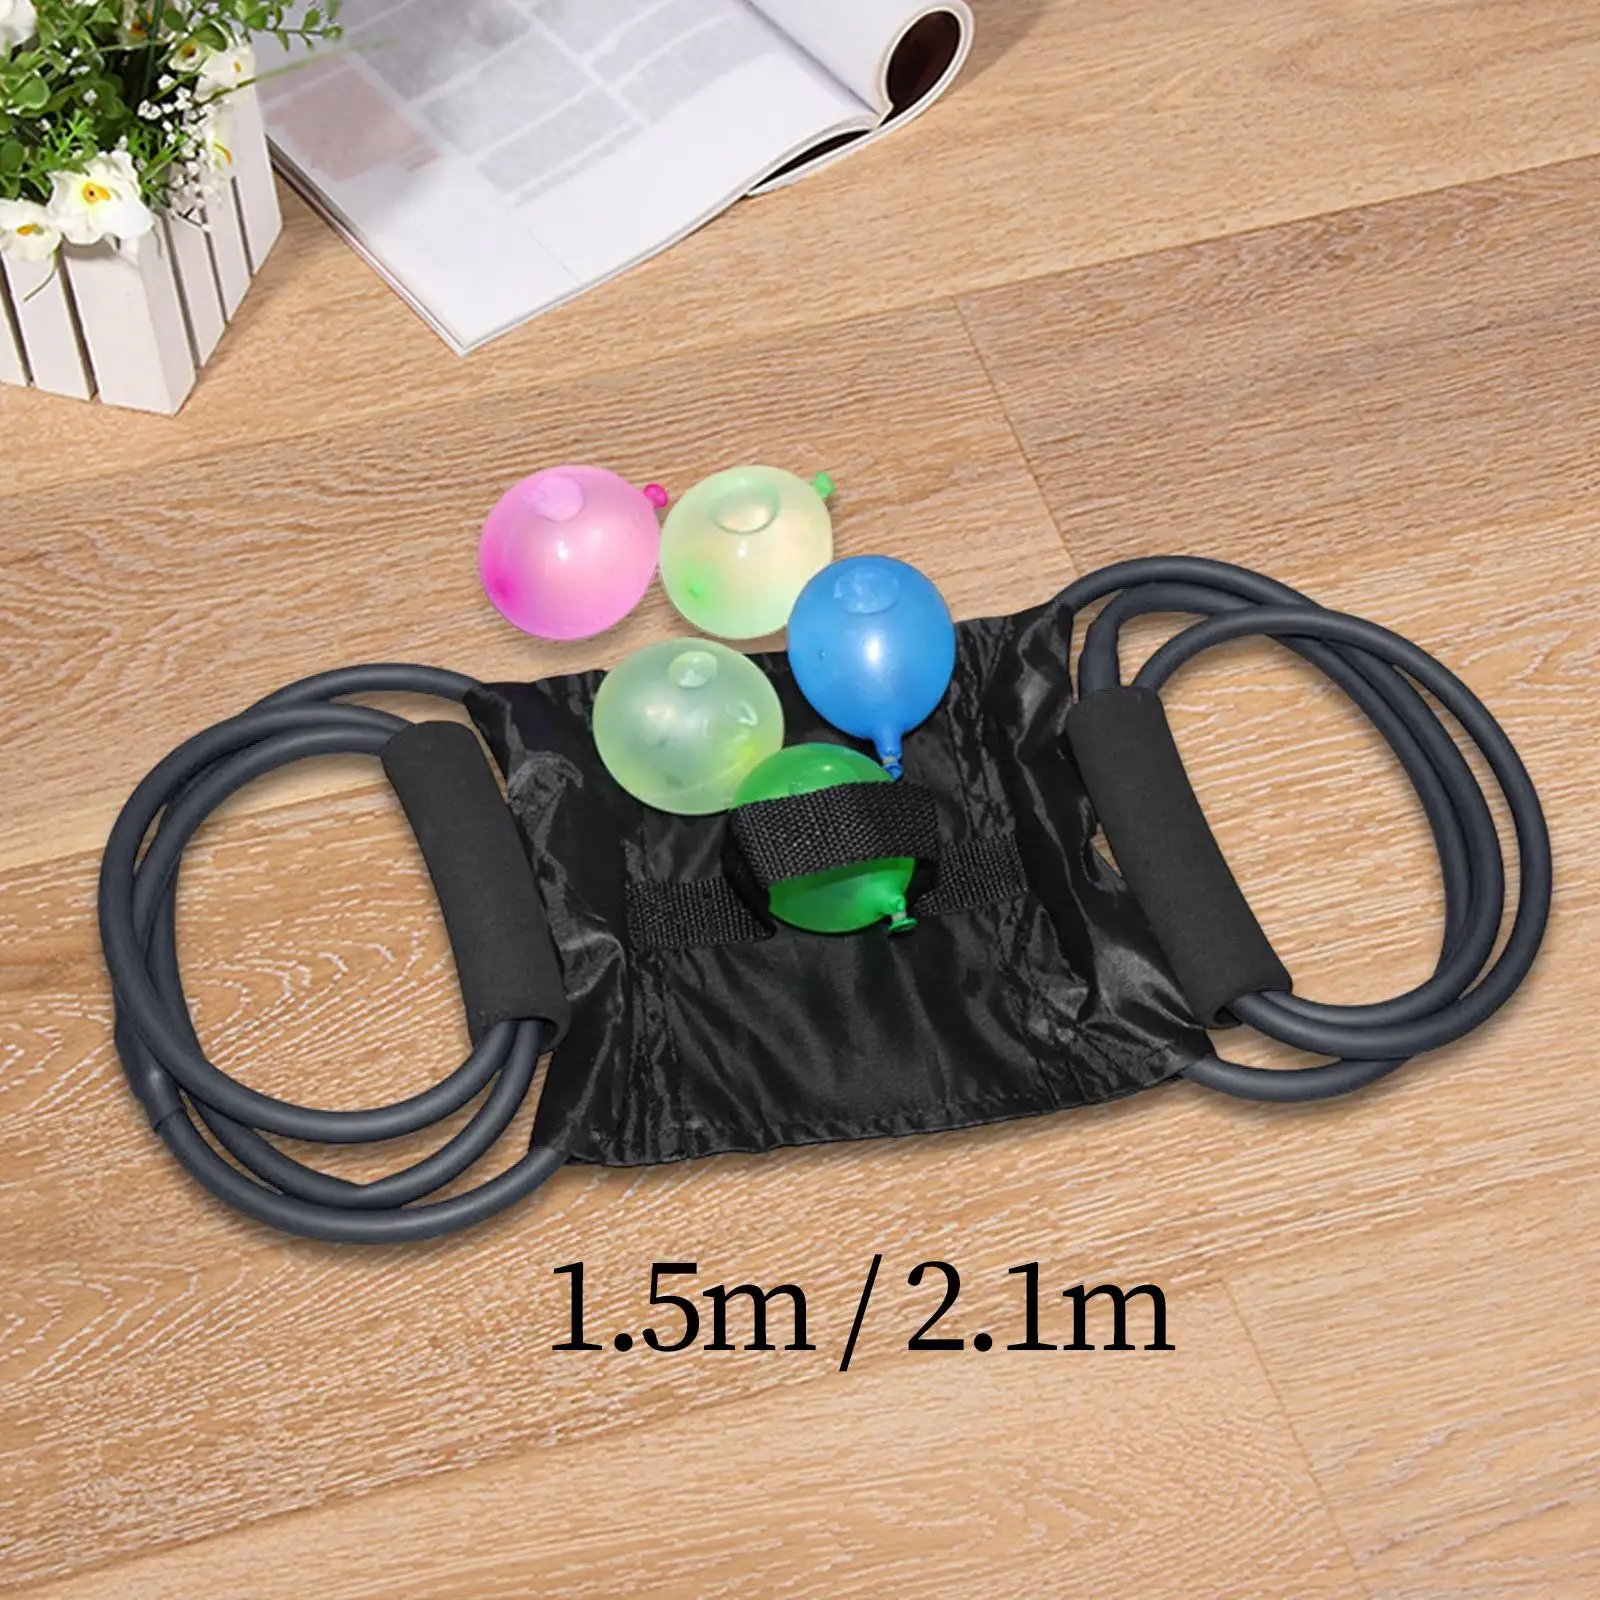 Water Balloon Launcher Yard Game Balloon Catapult Snowball Launcher 3 Person Slingshots for Beach Winter Sports Holidays Kids